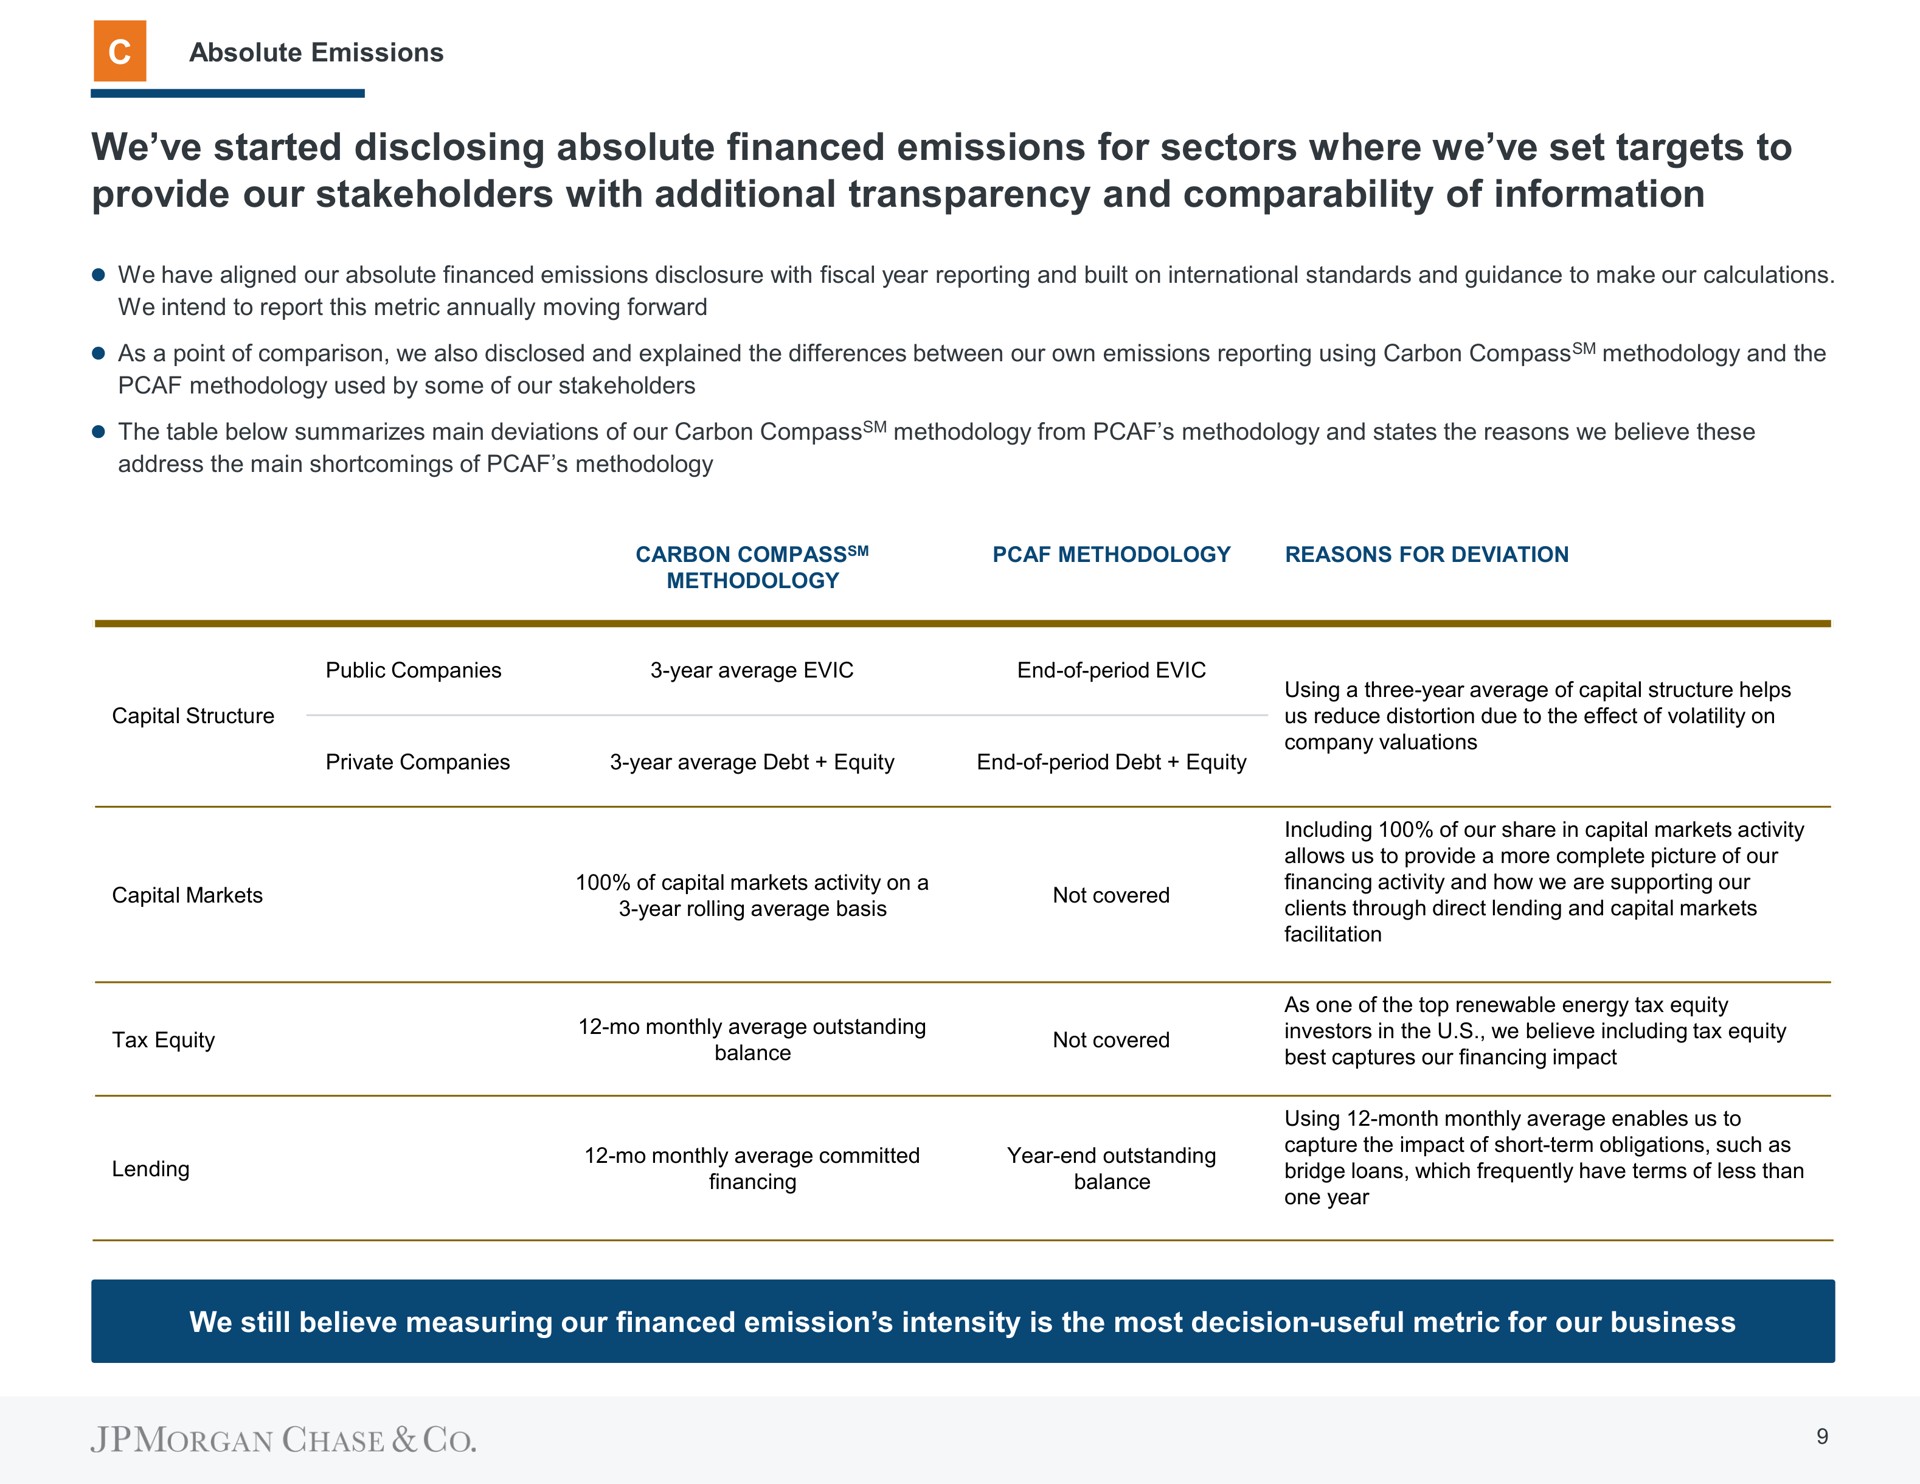 we started disclosing absolute financed emissions for sectors where we set targets to provide our stakeholders with additional transparency and comparability of information | J.P.Morgan